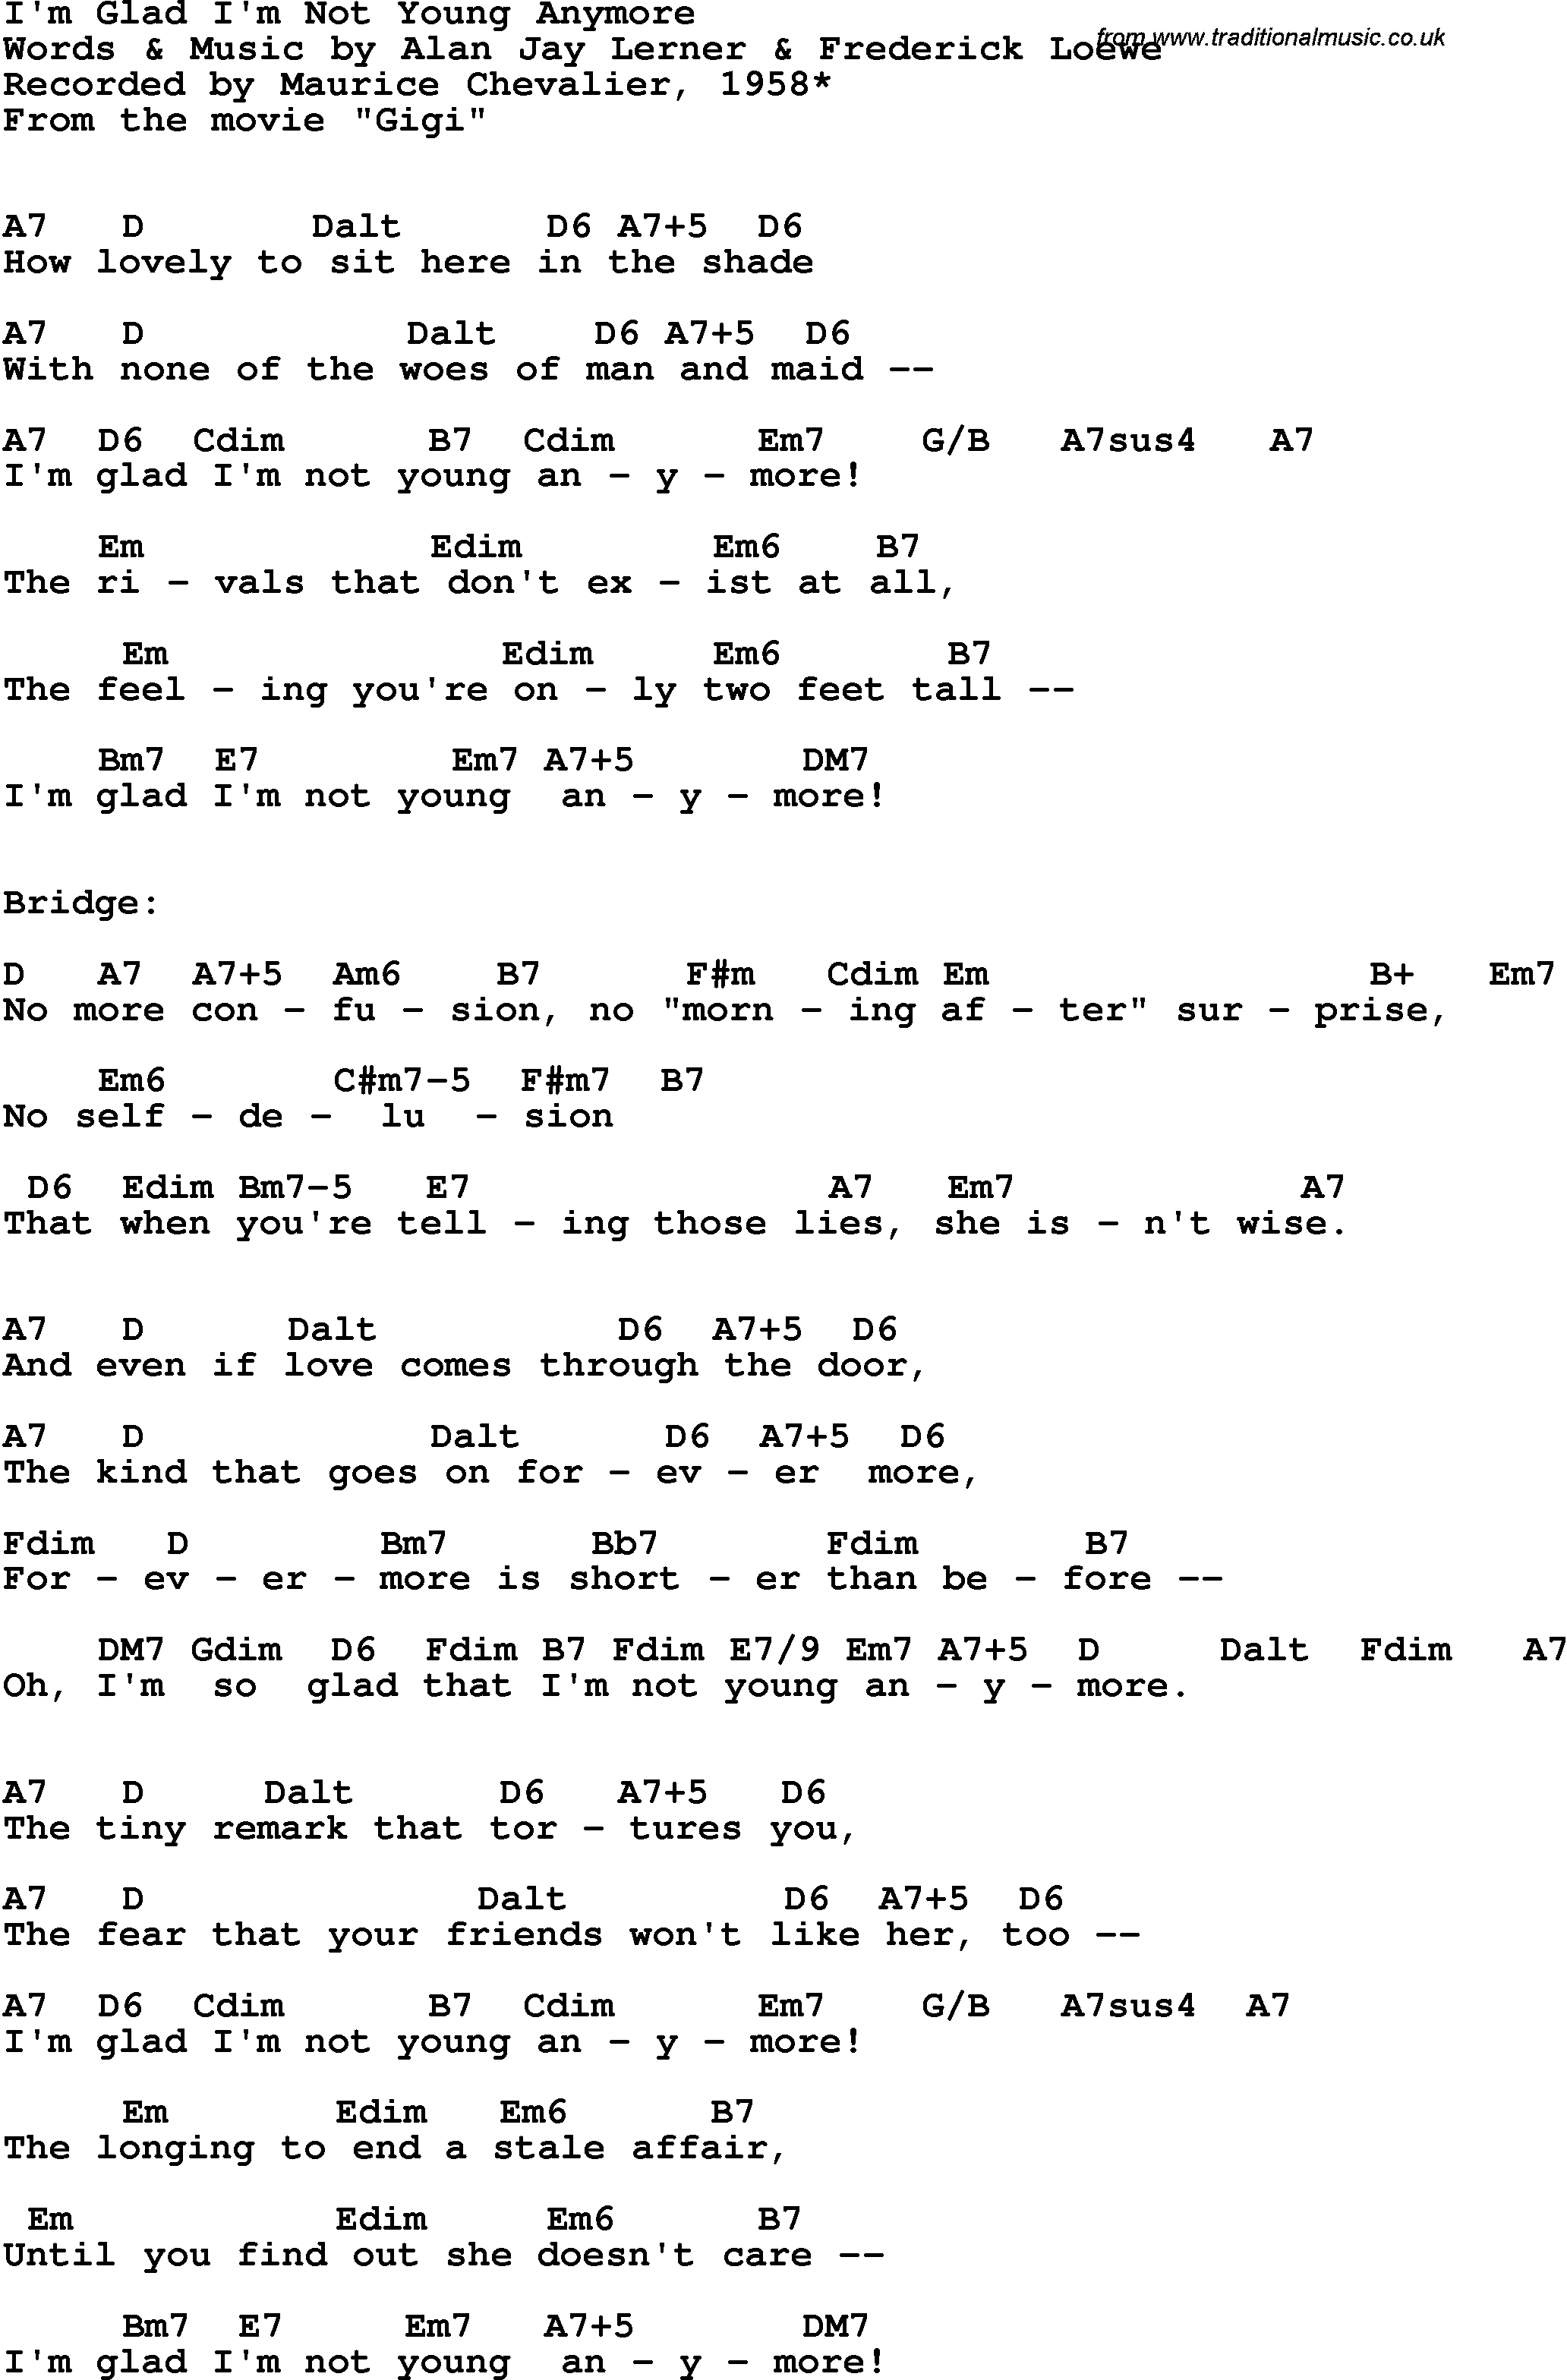 Song Lyrics with guitar chords for I'm Glad I'm Not Young Anymore - Maurice Chevalier, 1958